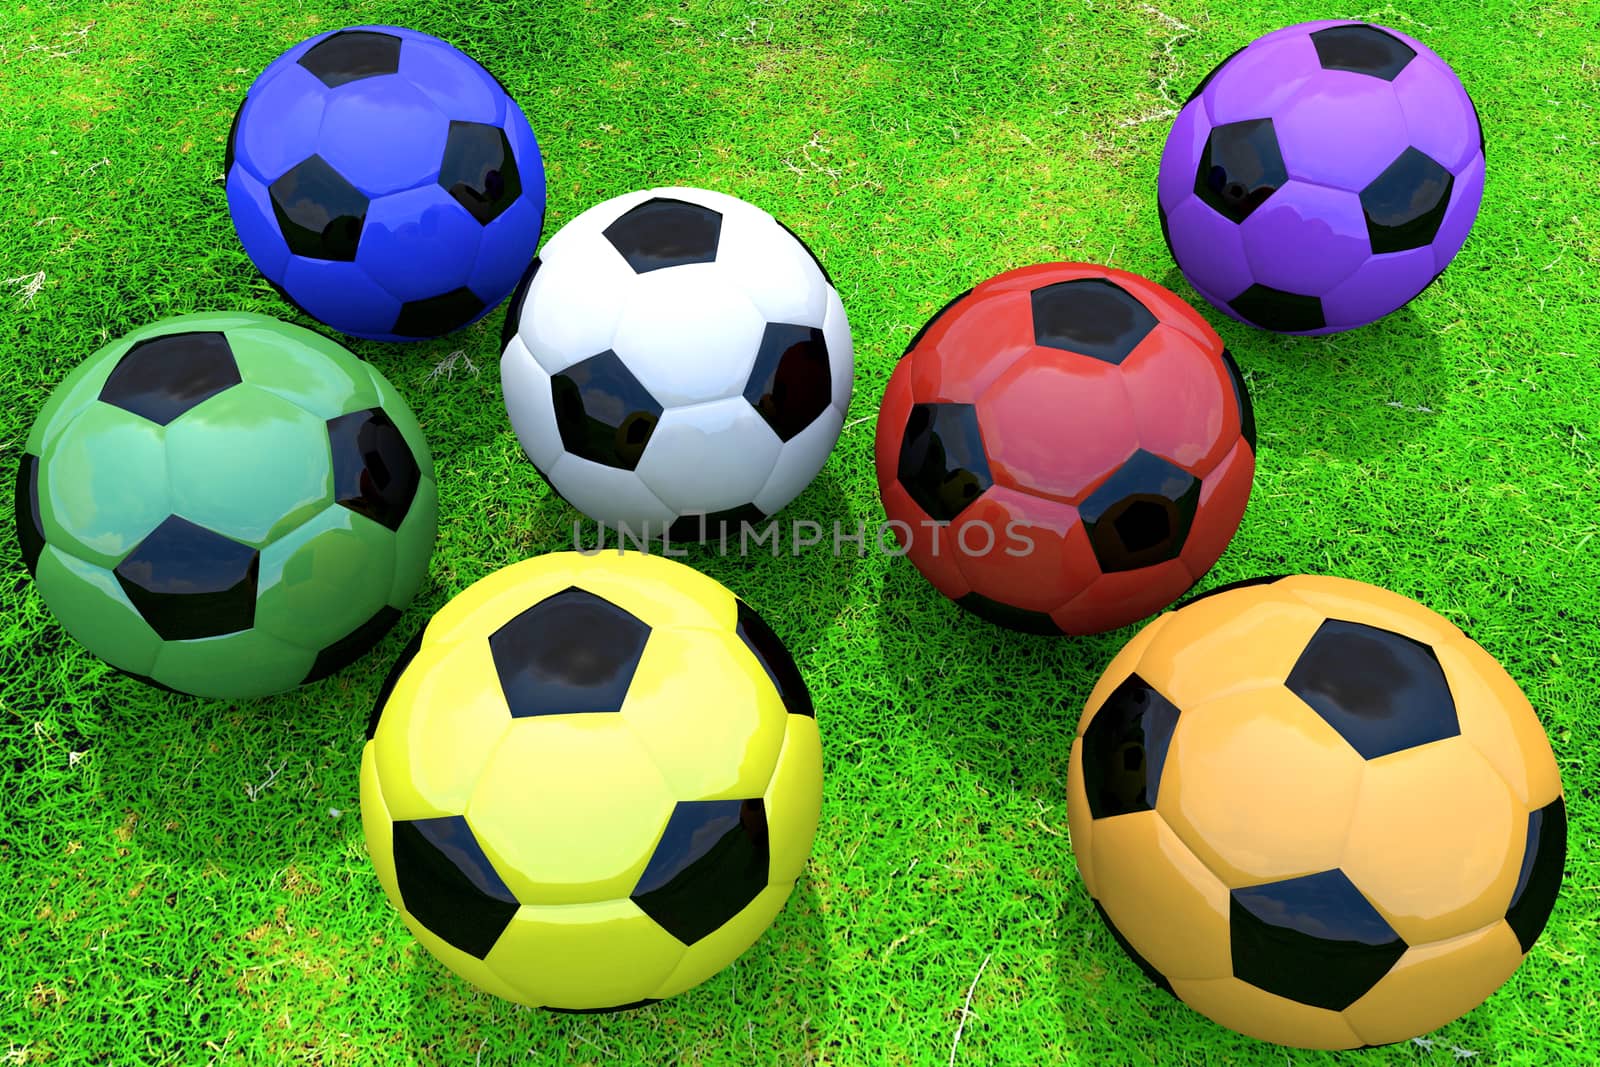 Colored soccer balls on grass